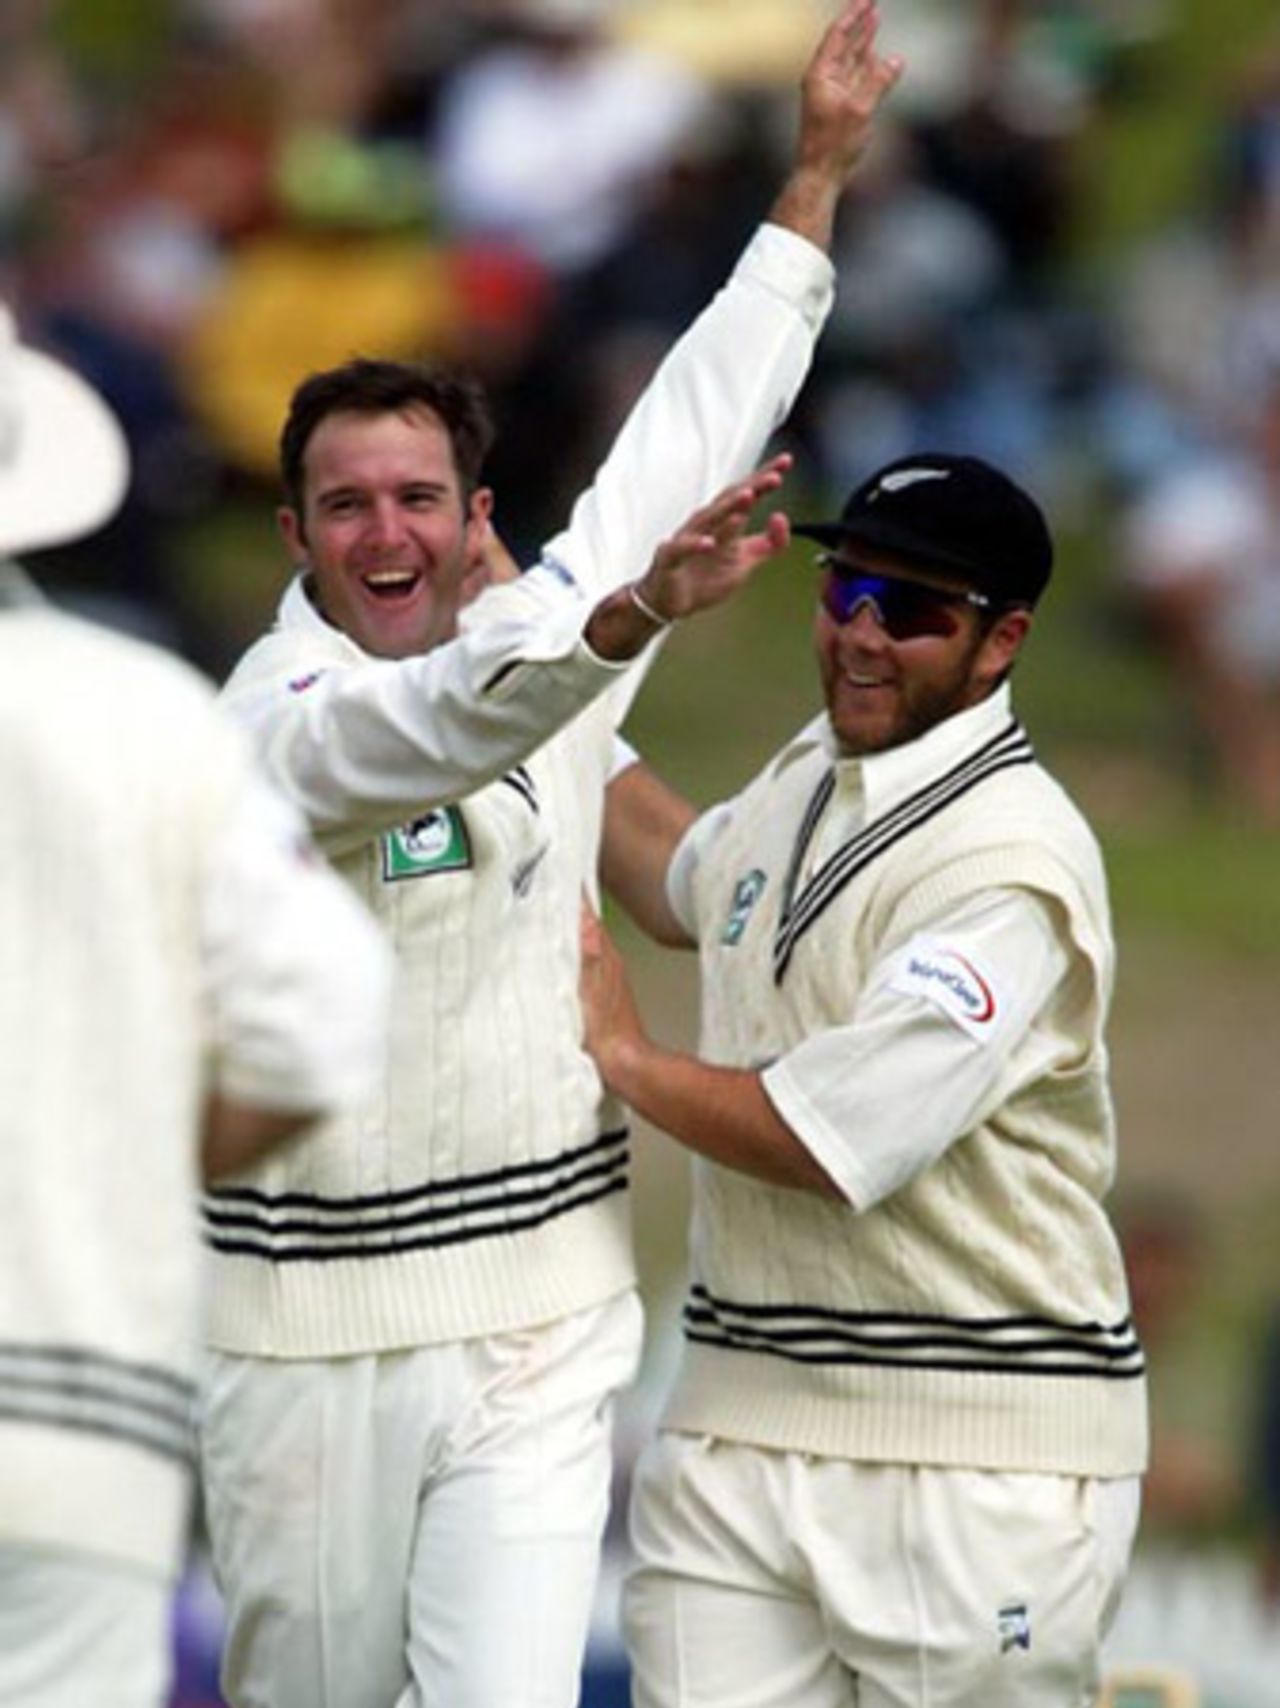 New Zealand bowler Nathan Astle (left) and team-mate Craig McMillan celebrate the dismissal of Indian batsman VVS Laxman, bowled by Astle for four. 2nd Test: New Zealand v India at Westpac Park, Hamilton, 19-23 December 2002 (21 December 2002).